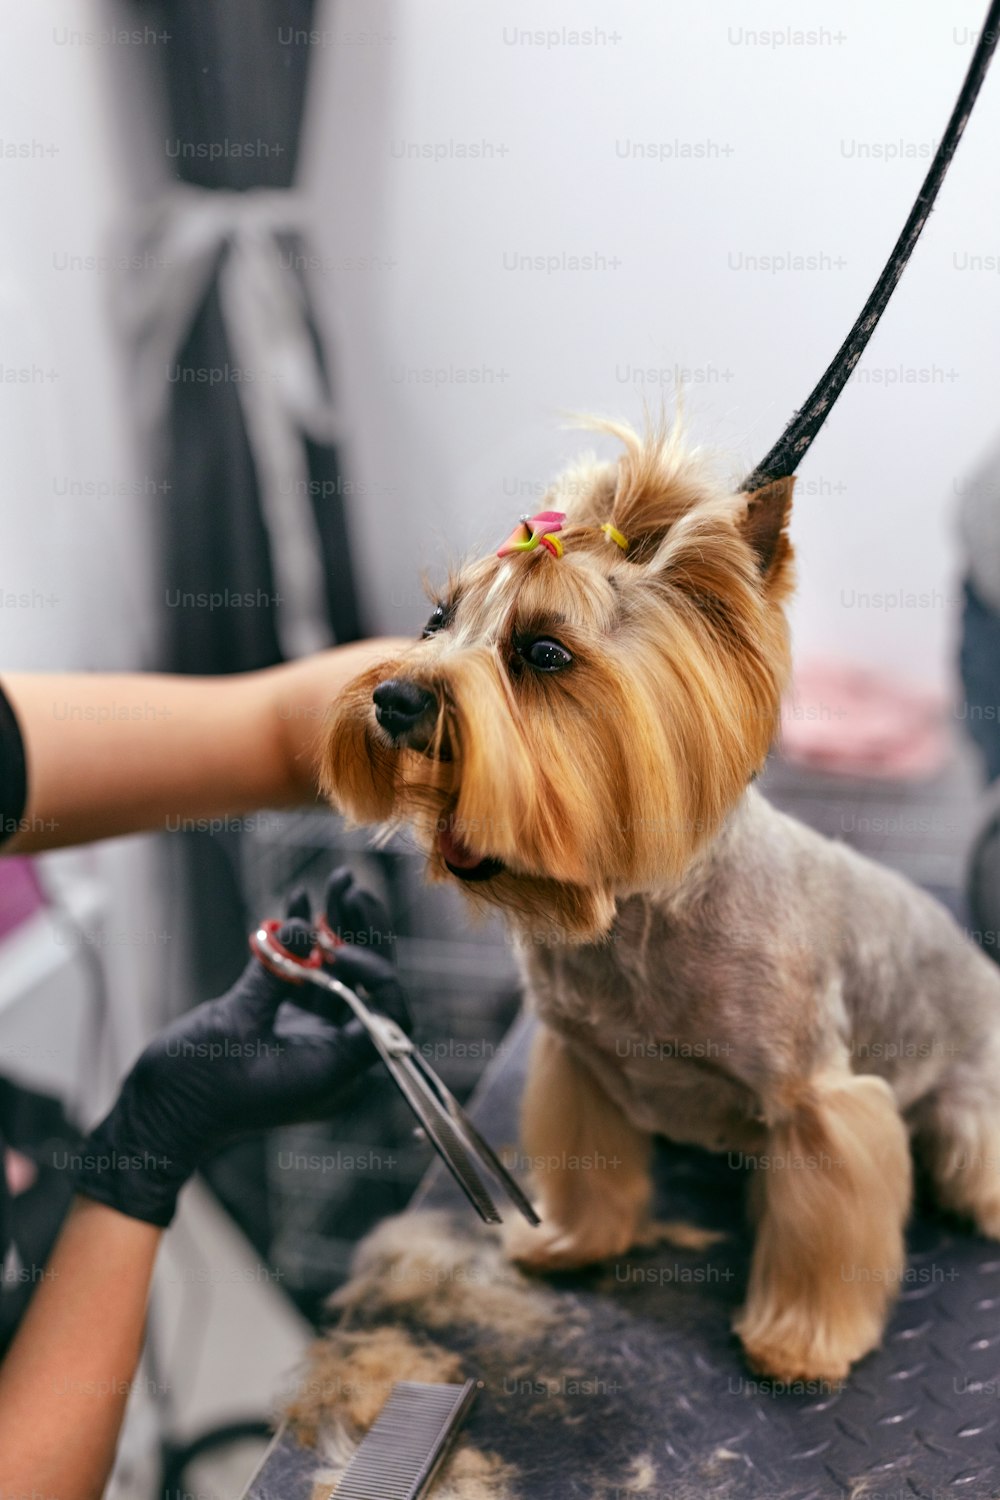 Dog Gets Hair Cut At Pet Spa Grooming Salon. Closeup Of Dog Face While Groomer Cutting Hair With Scissors. High Resolution